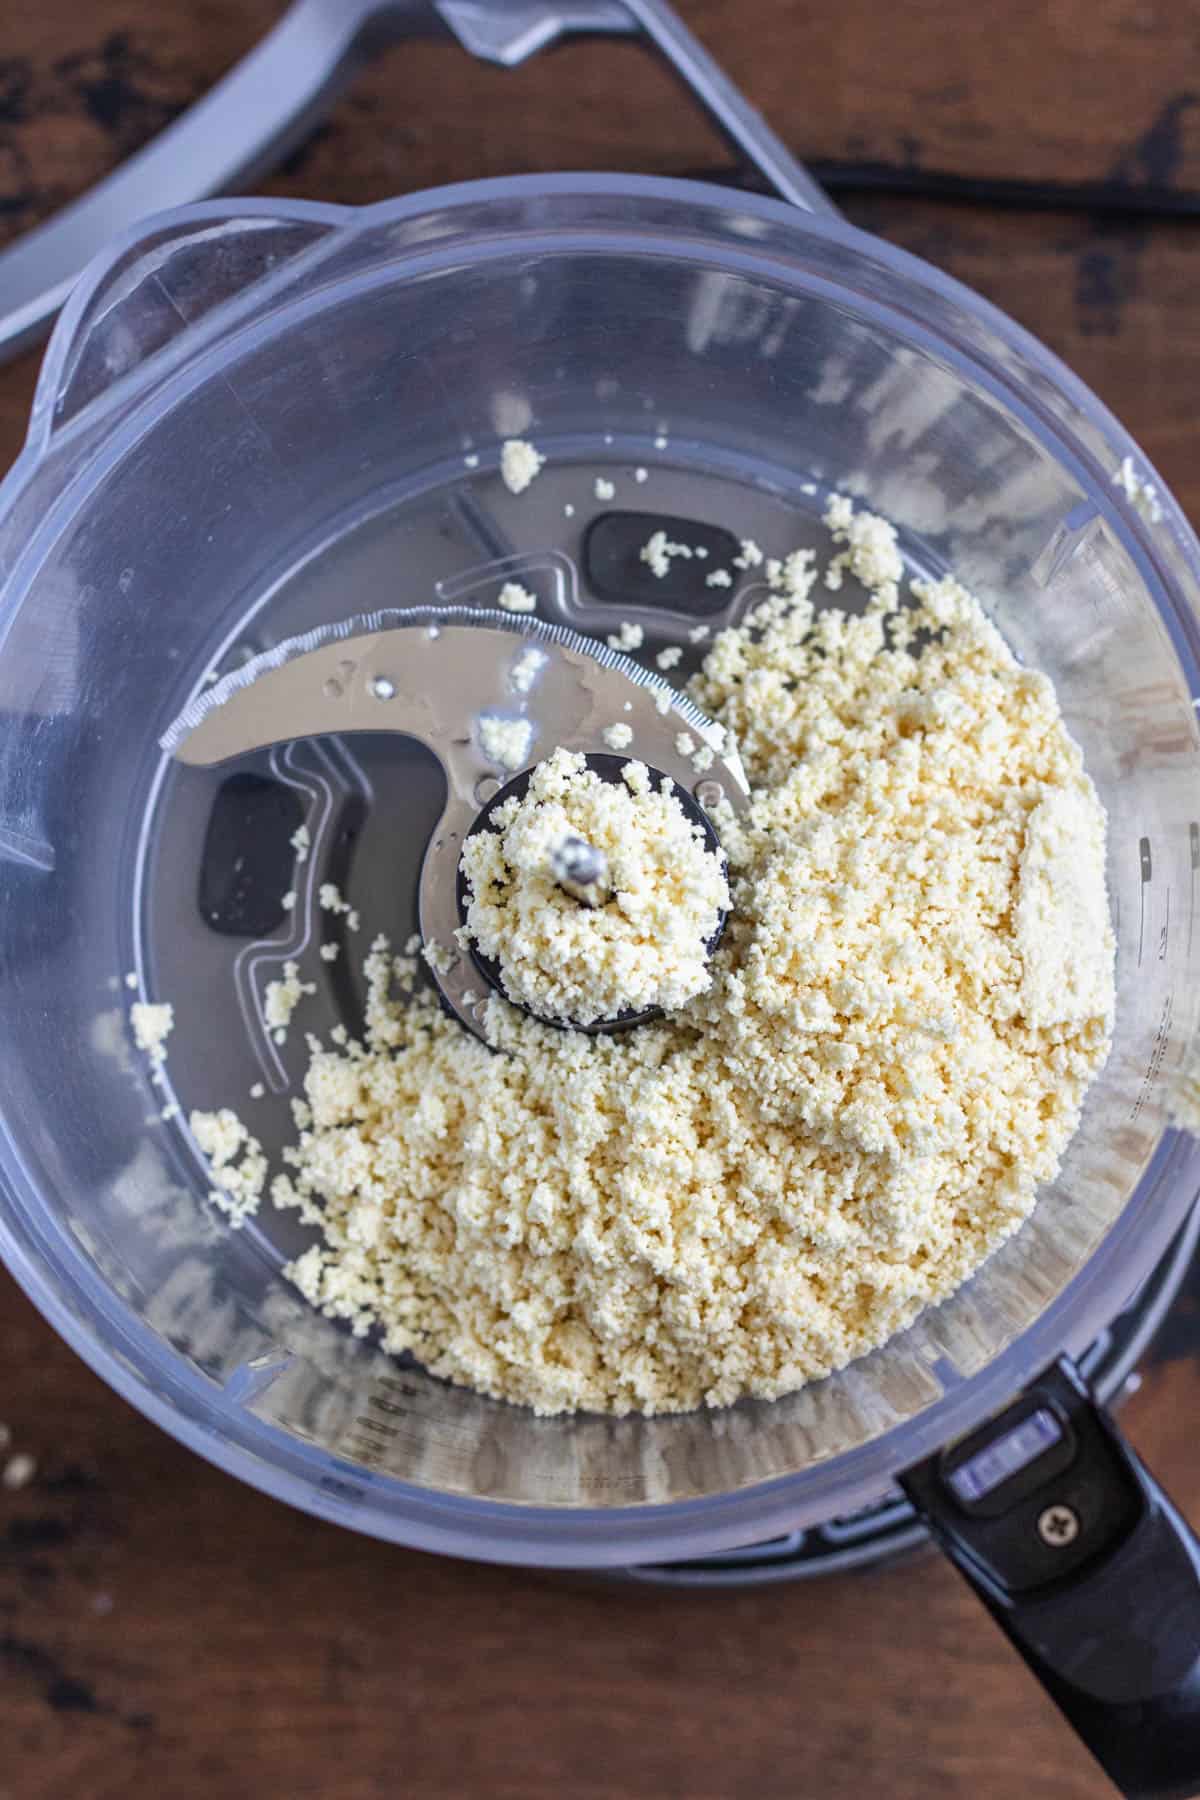 crumbly white chocolate mixture in a food processor not yet processed